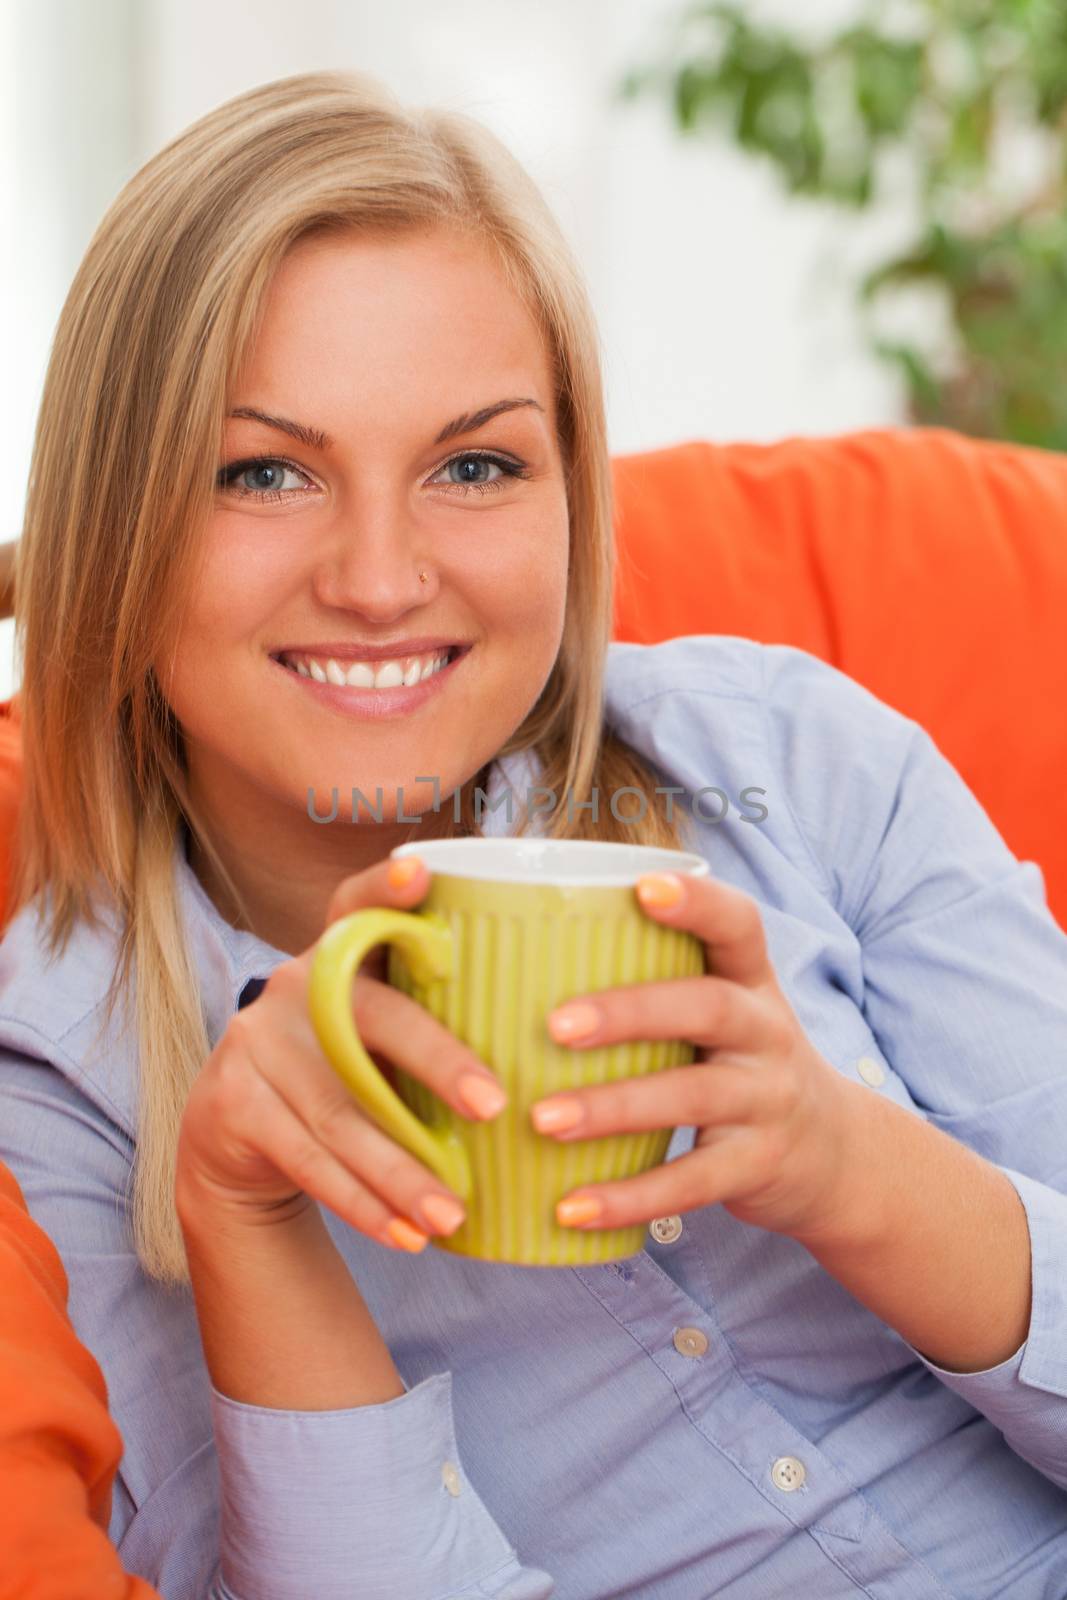 Young blond caucasian woman smiling with mug in orange sofa